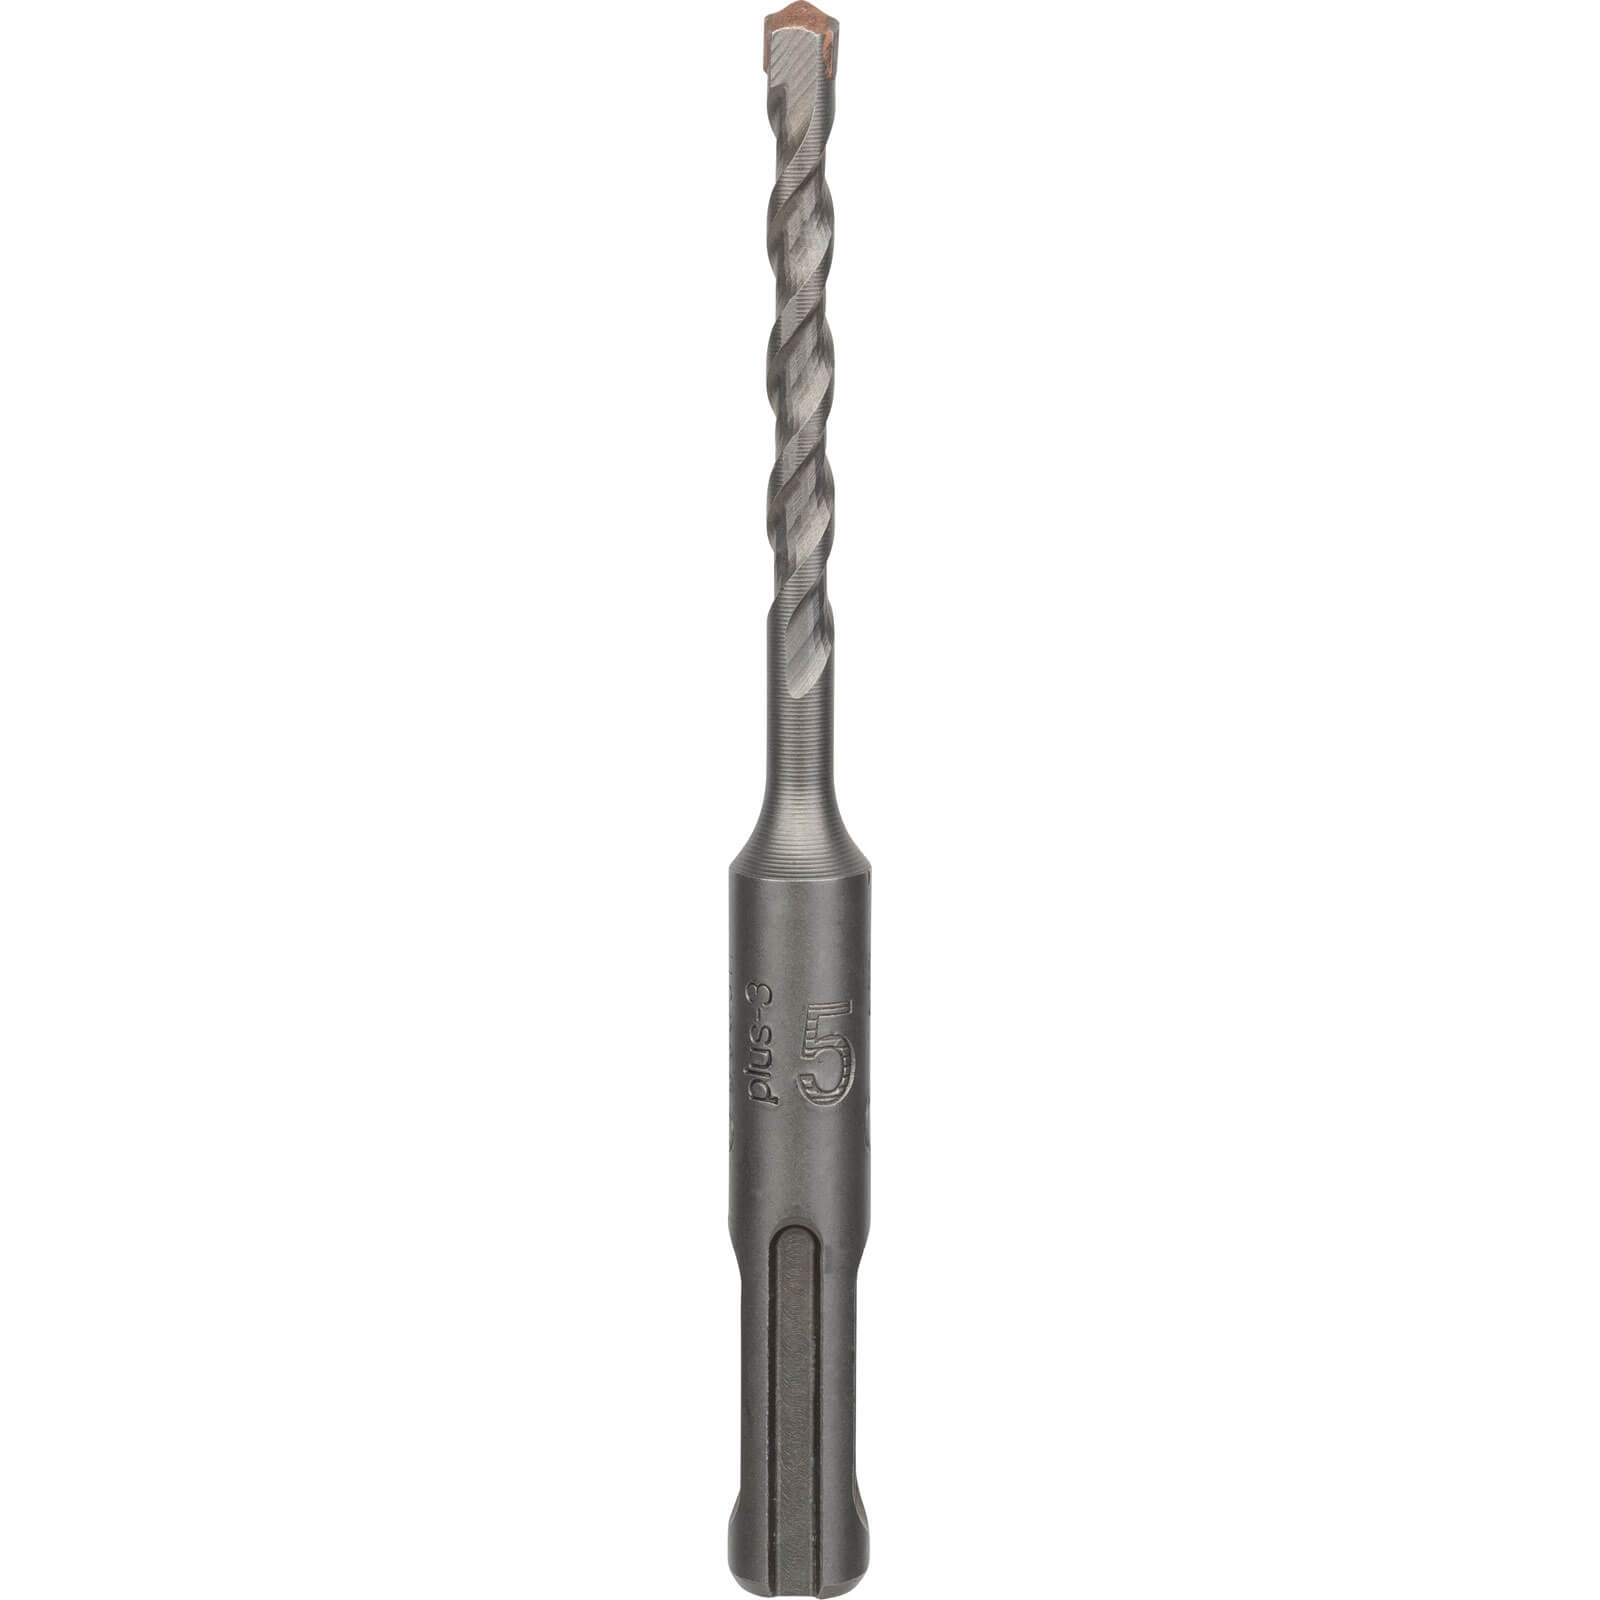 Image of Bosch Series 3 SDS Plus Masonry Drill Bit 5mm 110mm Pack of 1